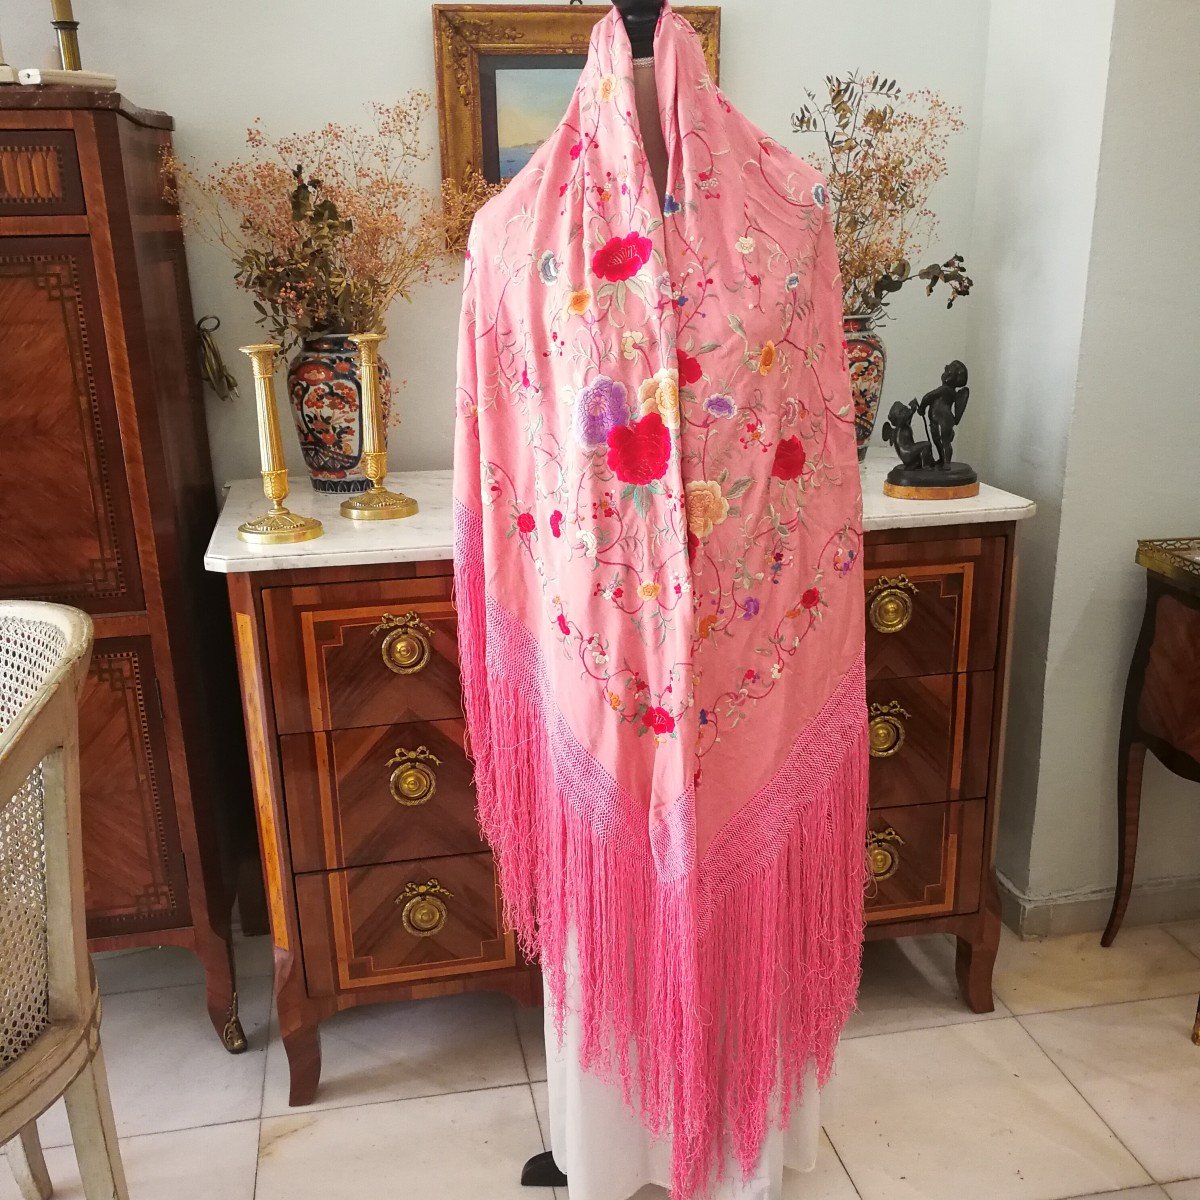 Empire Style Manila Shawl In Strawberry Pink Silk With Flowers, Early 20th Century.